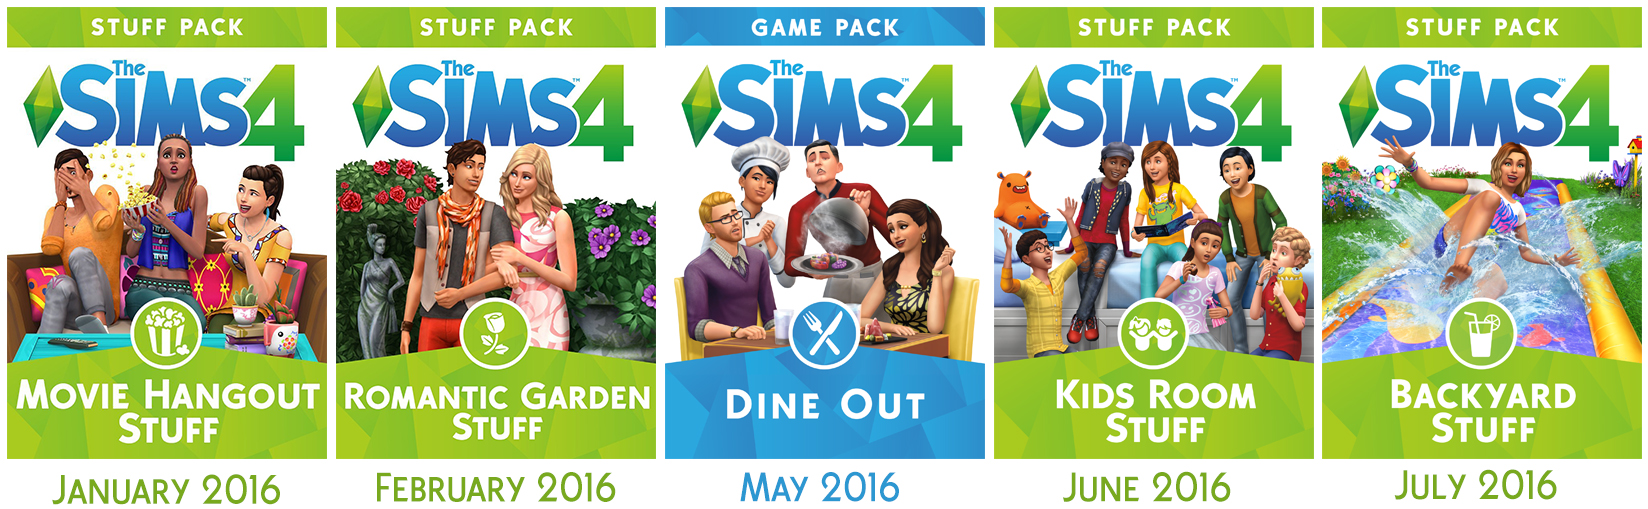 how to download sims 4 expansion packs for free